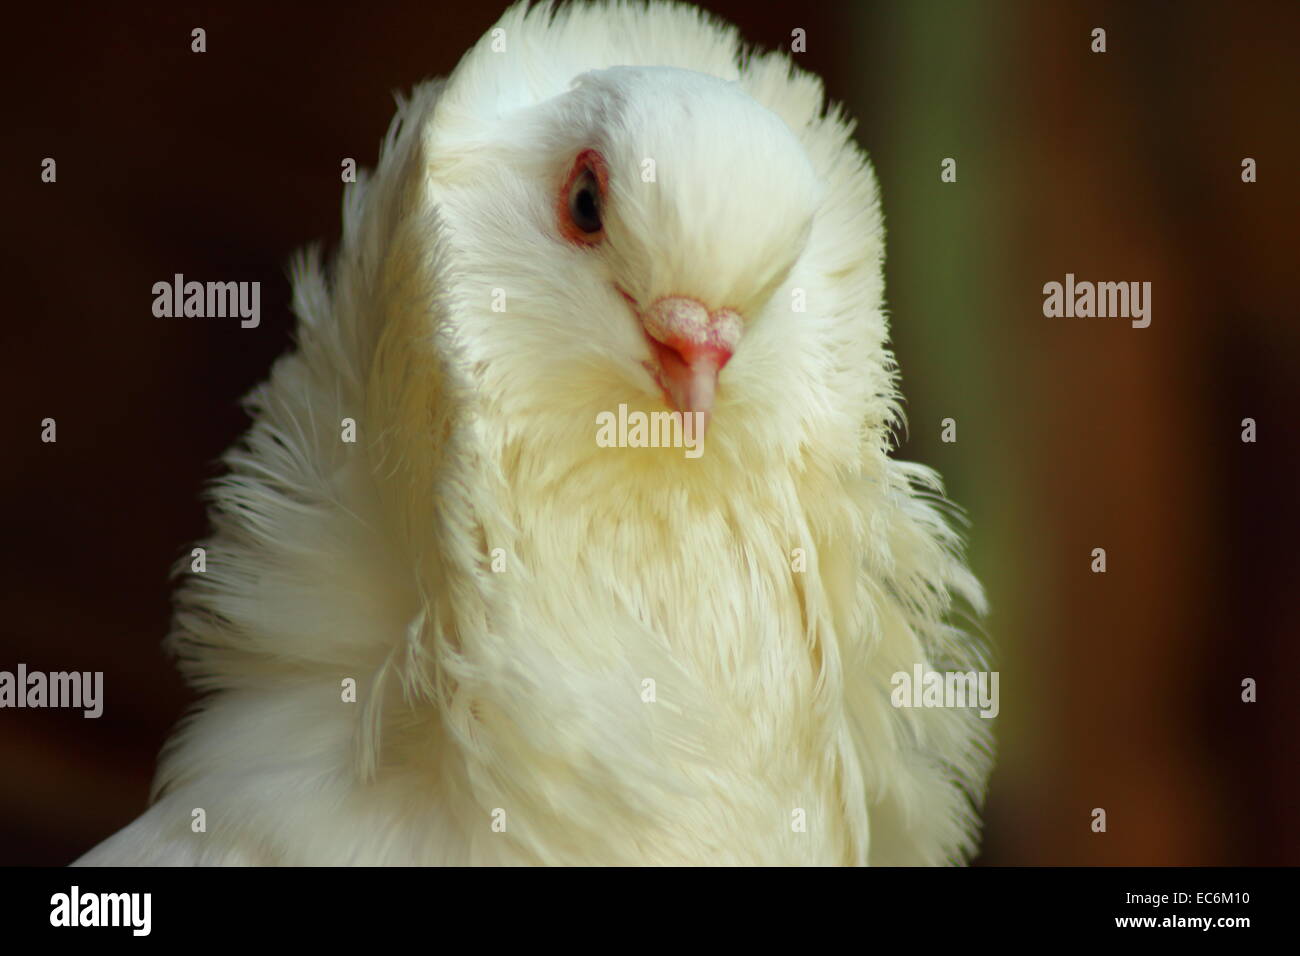 White Pigeon close up view Stock Photo